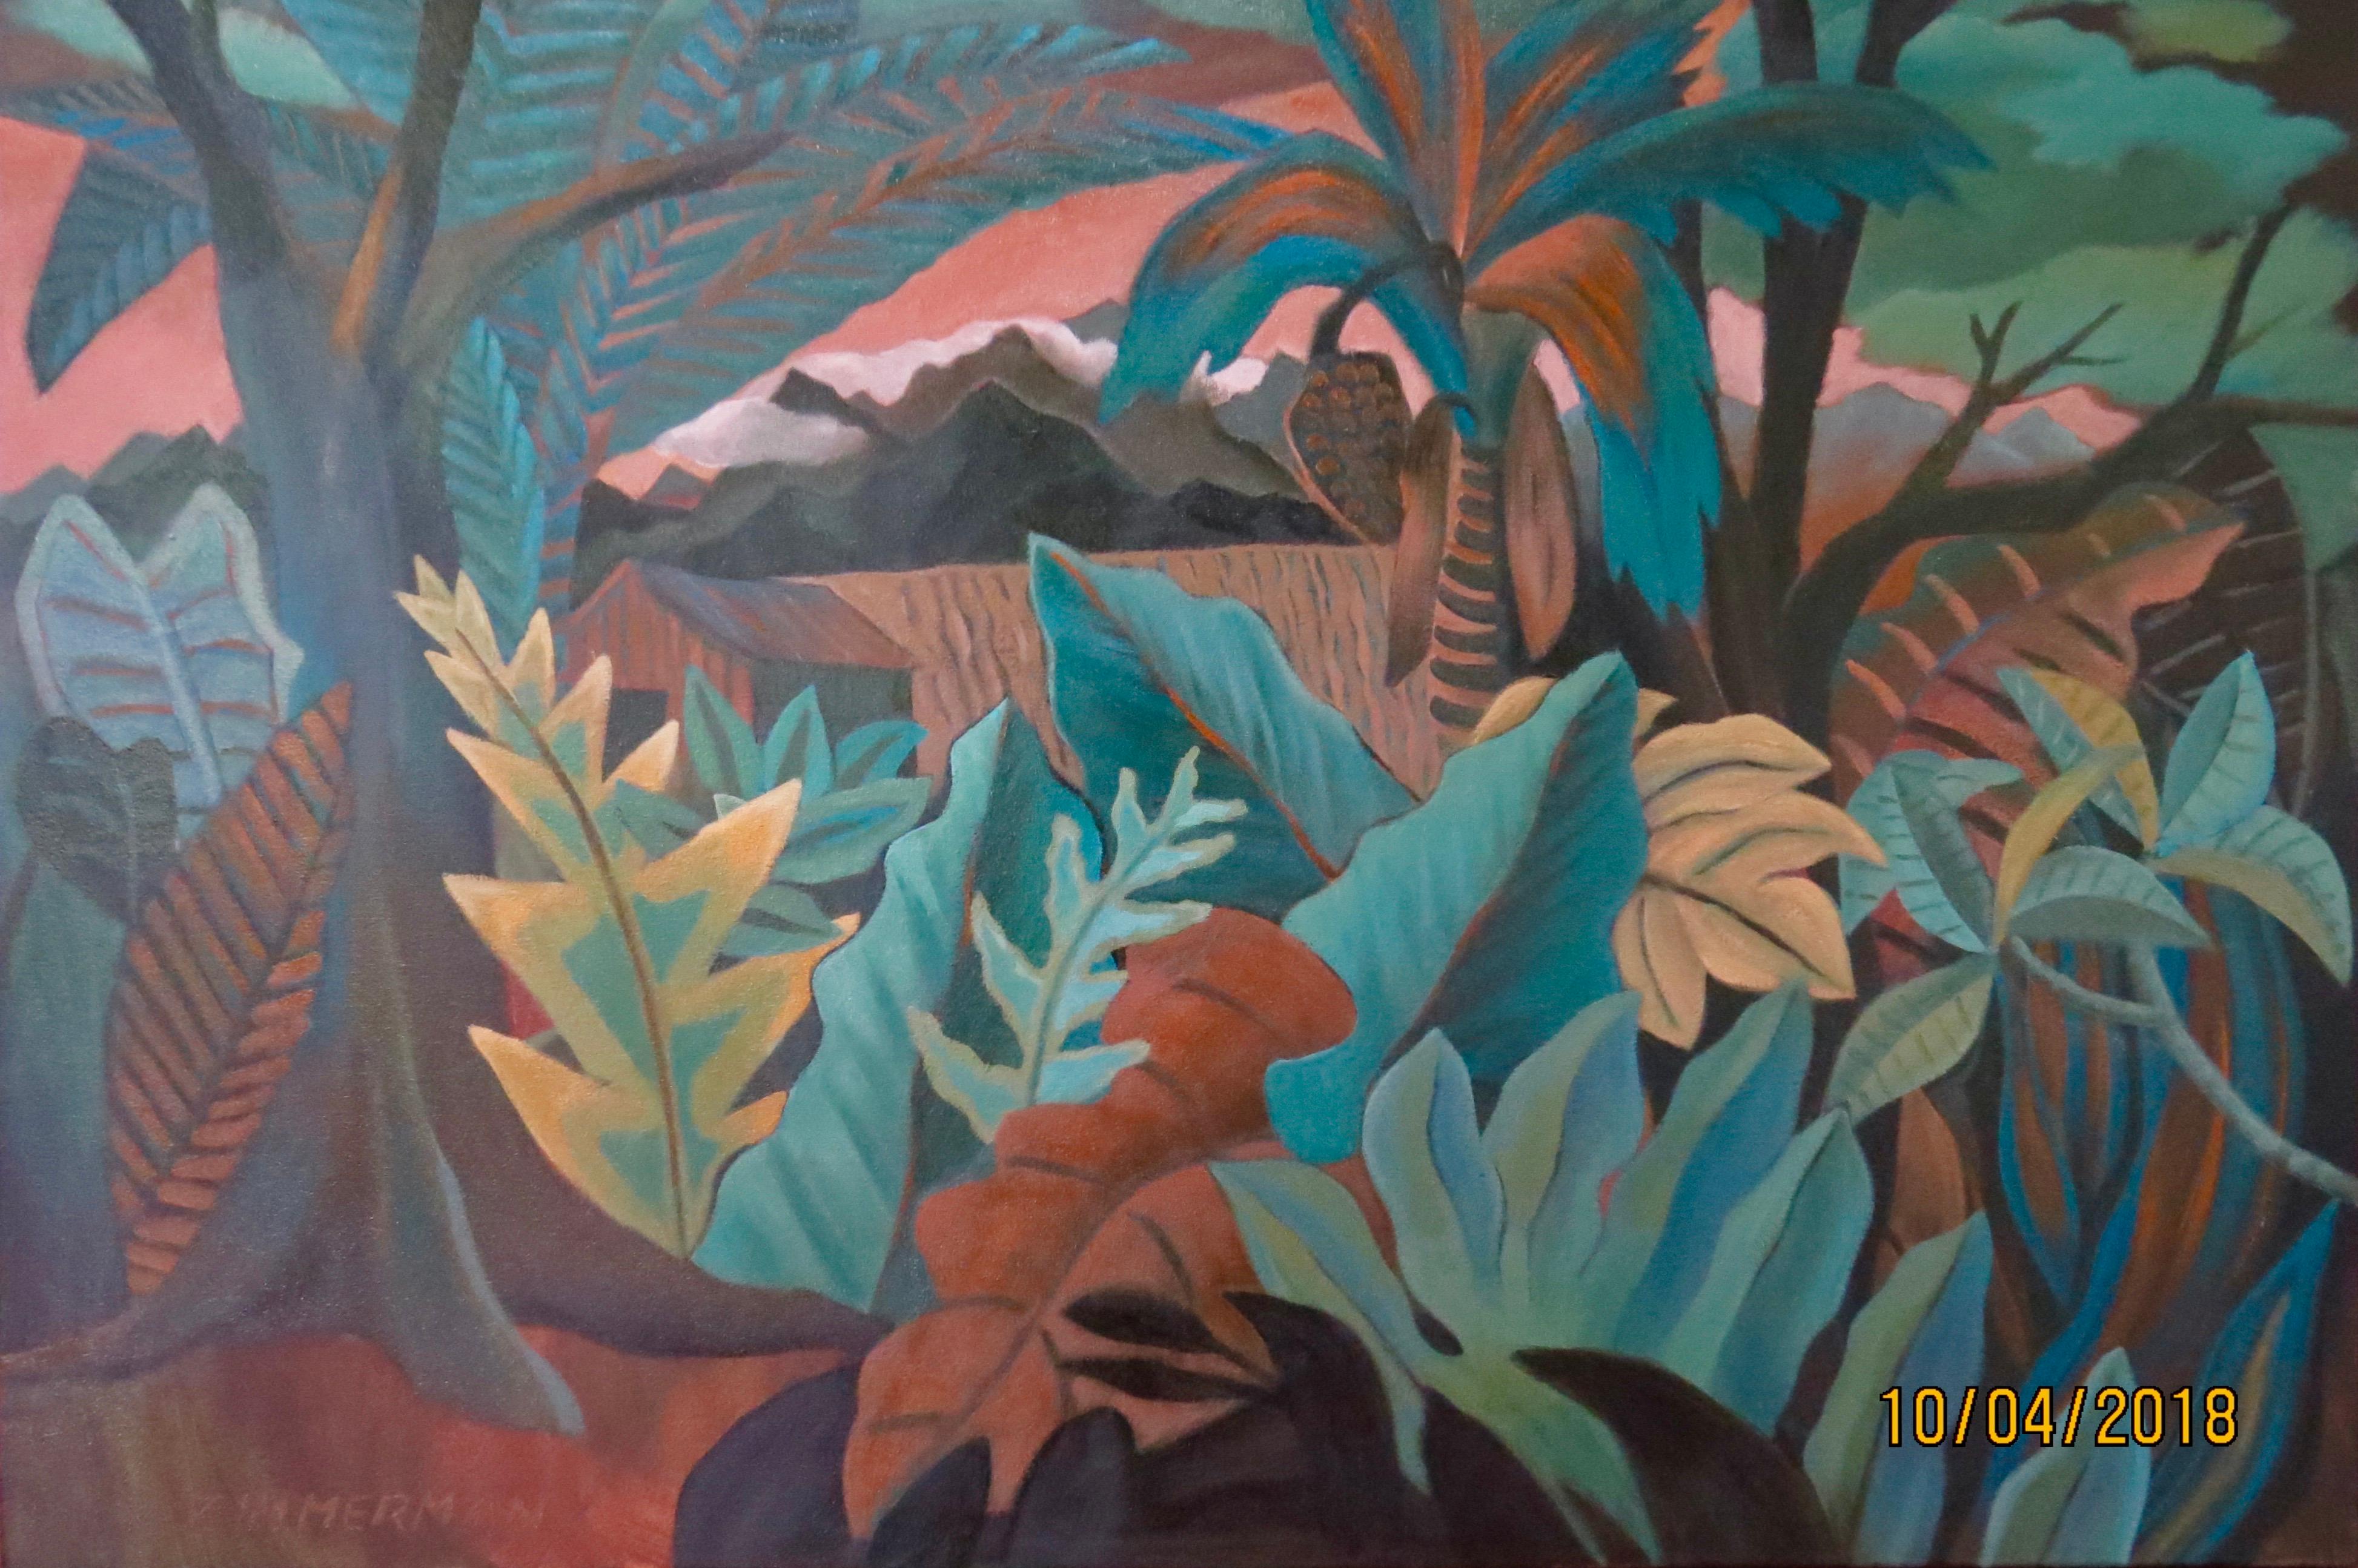 The flow of botanical splendor bursts in lavish color in the foreground while the palms and trees open the view to distant mountains in this tropical painting.

Jungle Fantasy #2 -  Landscape Painting - Oil on Canvas By Marc Zimmerman 

Marc